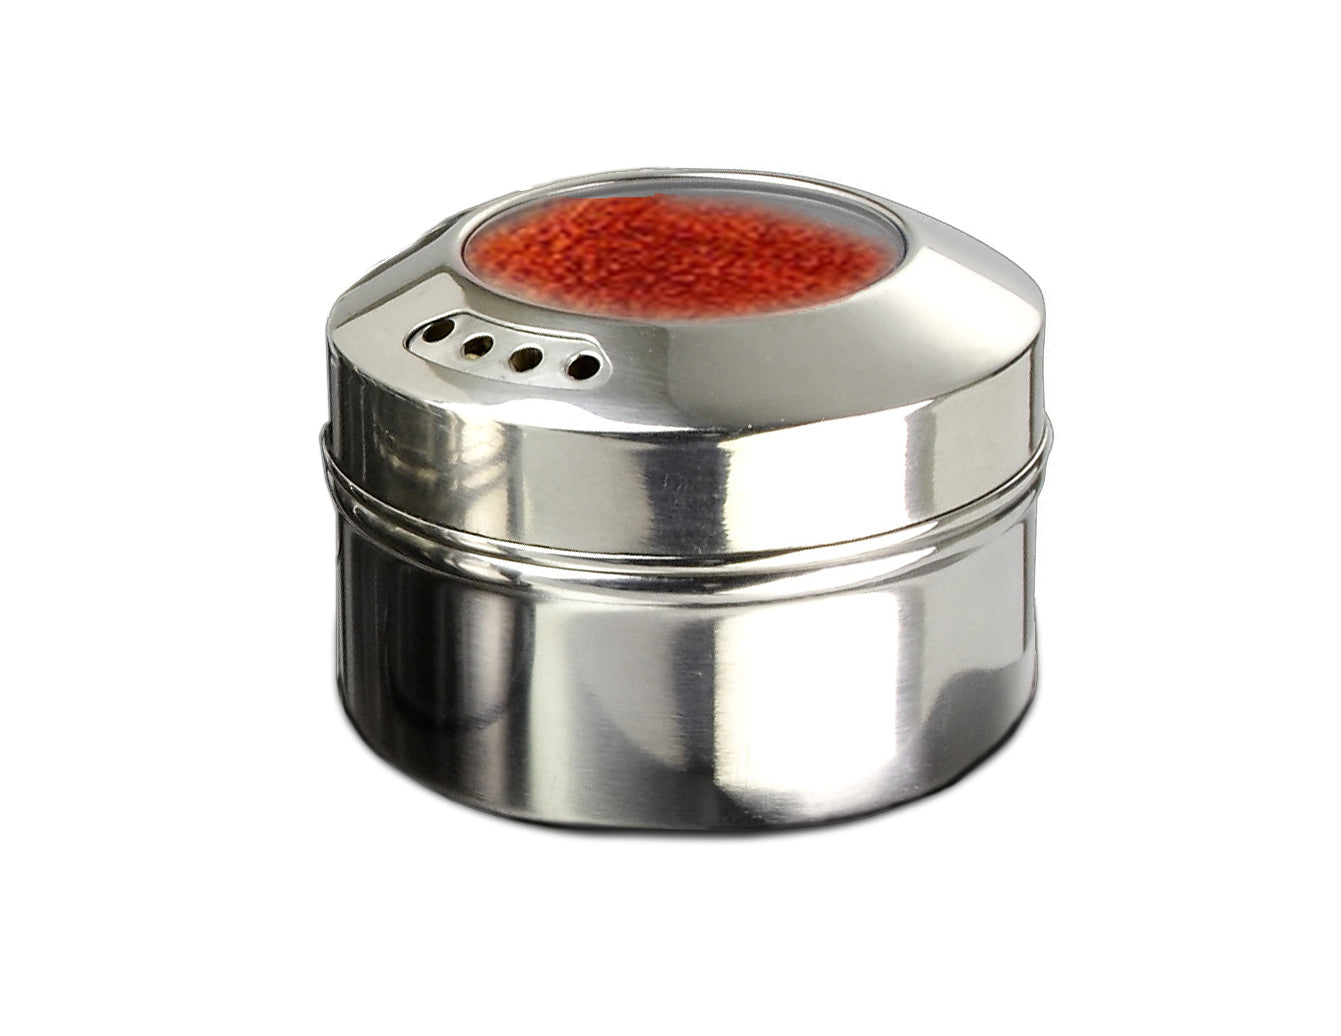 Cuisinox Magnetic Spice Canister / Shaker